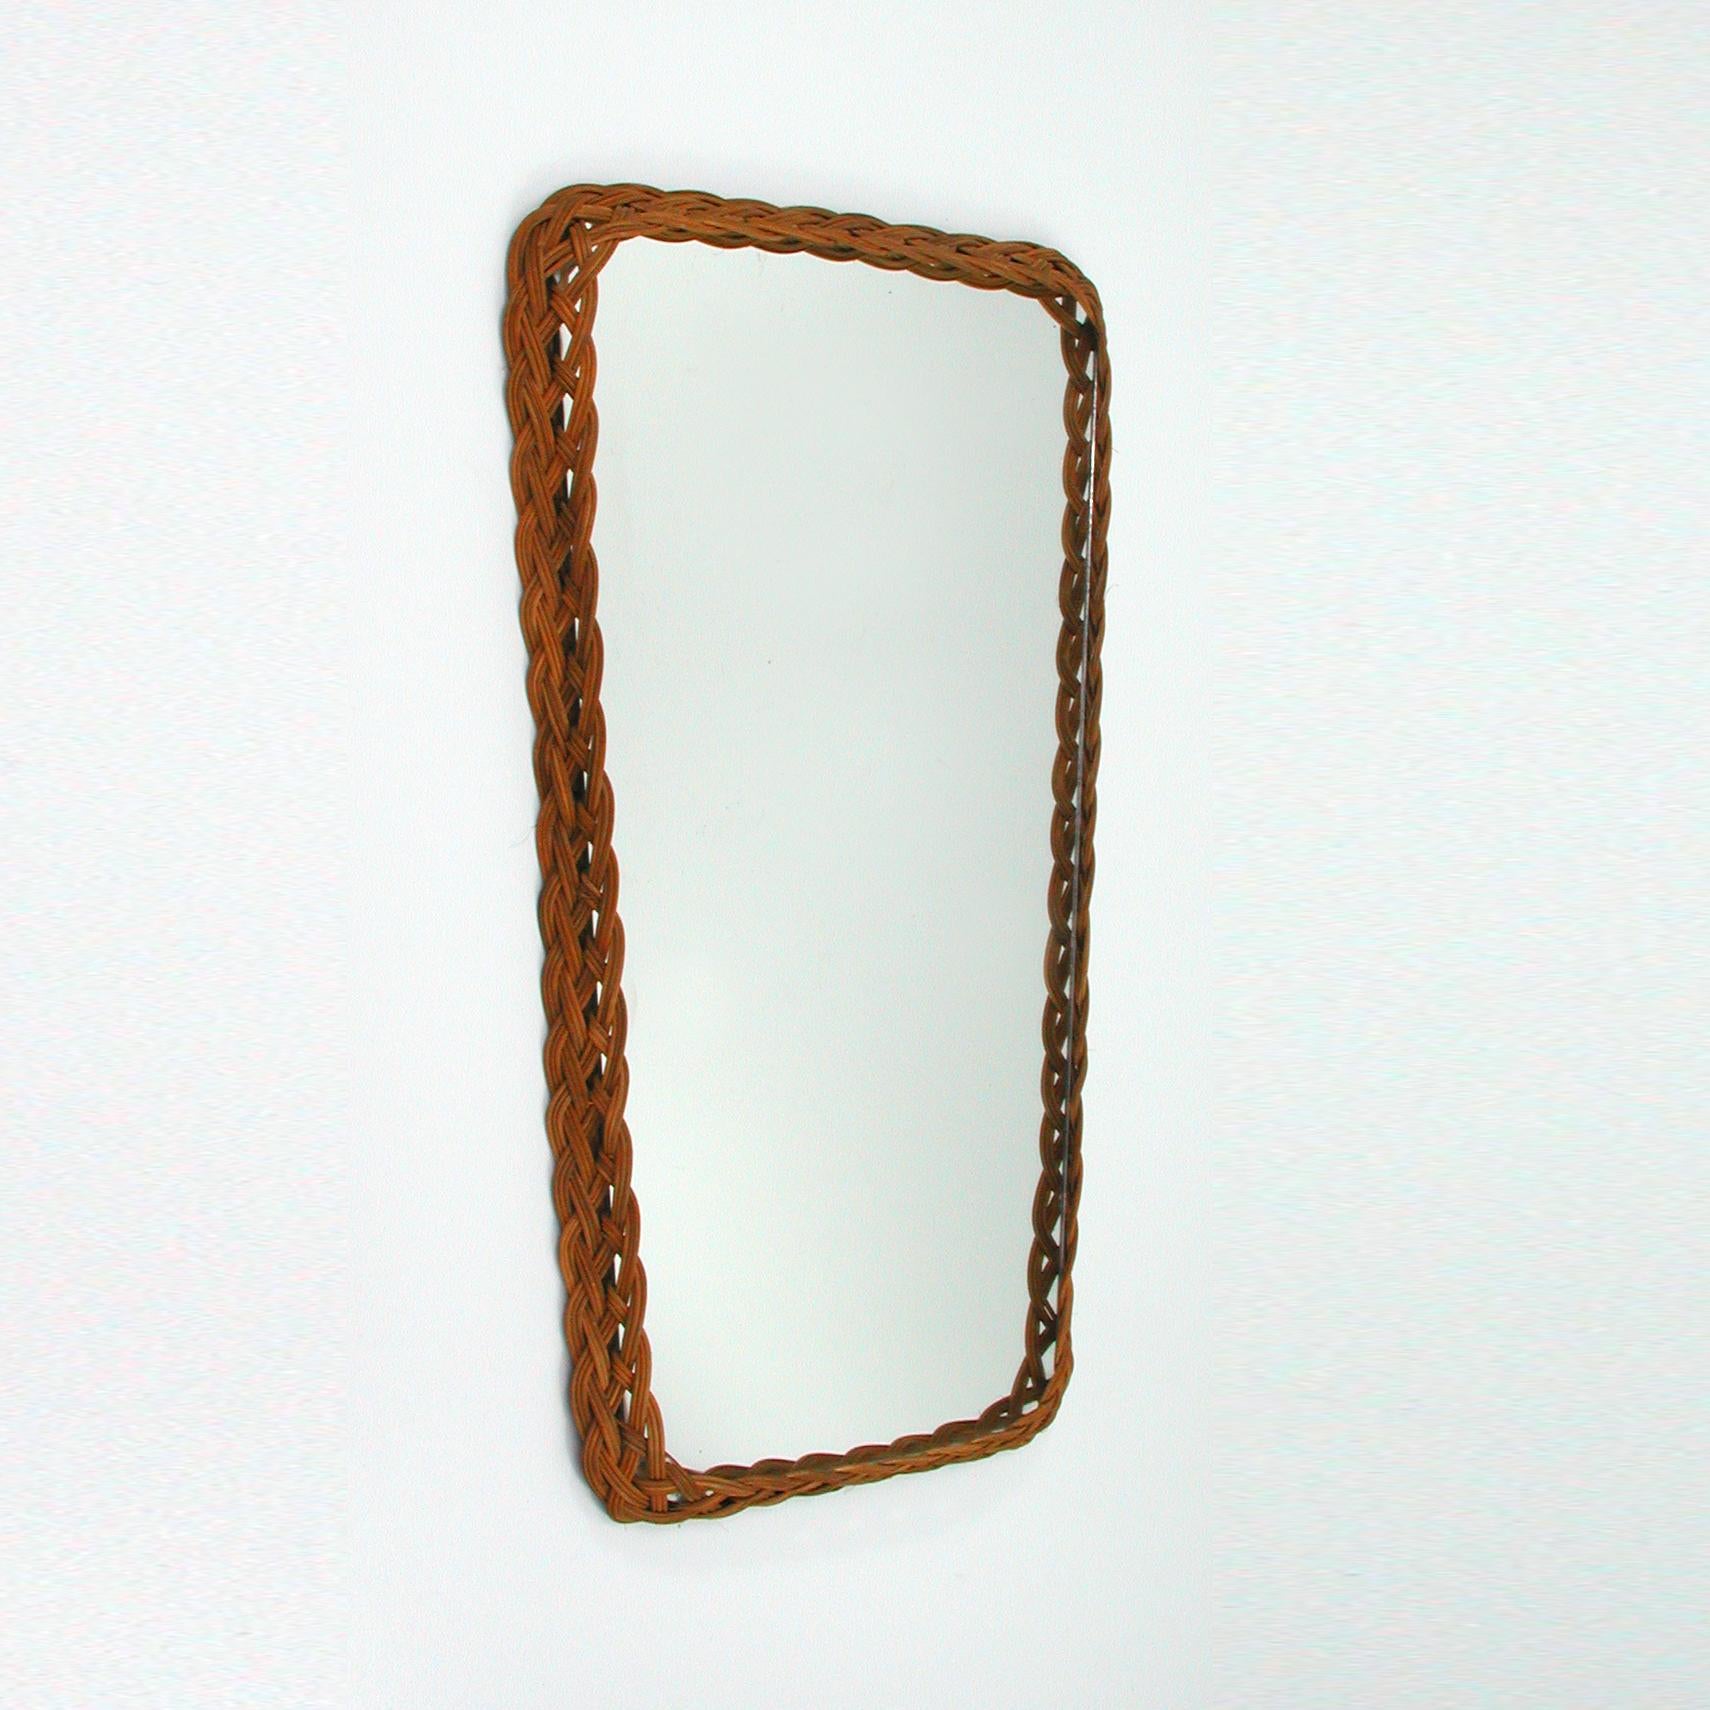 This vintage rattan wall mirror was made in France in the 1950s.
There is 1 mirror available.